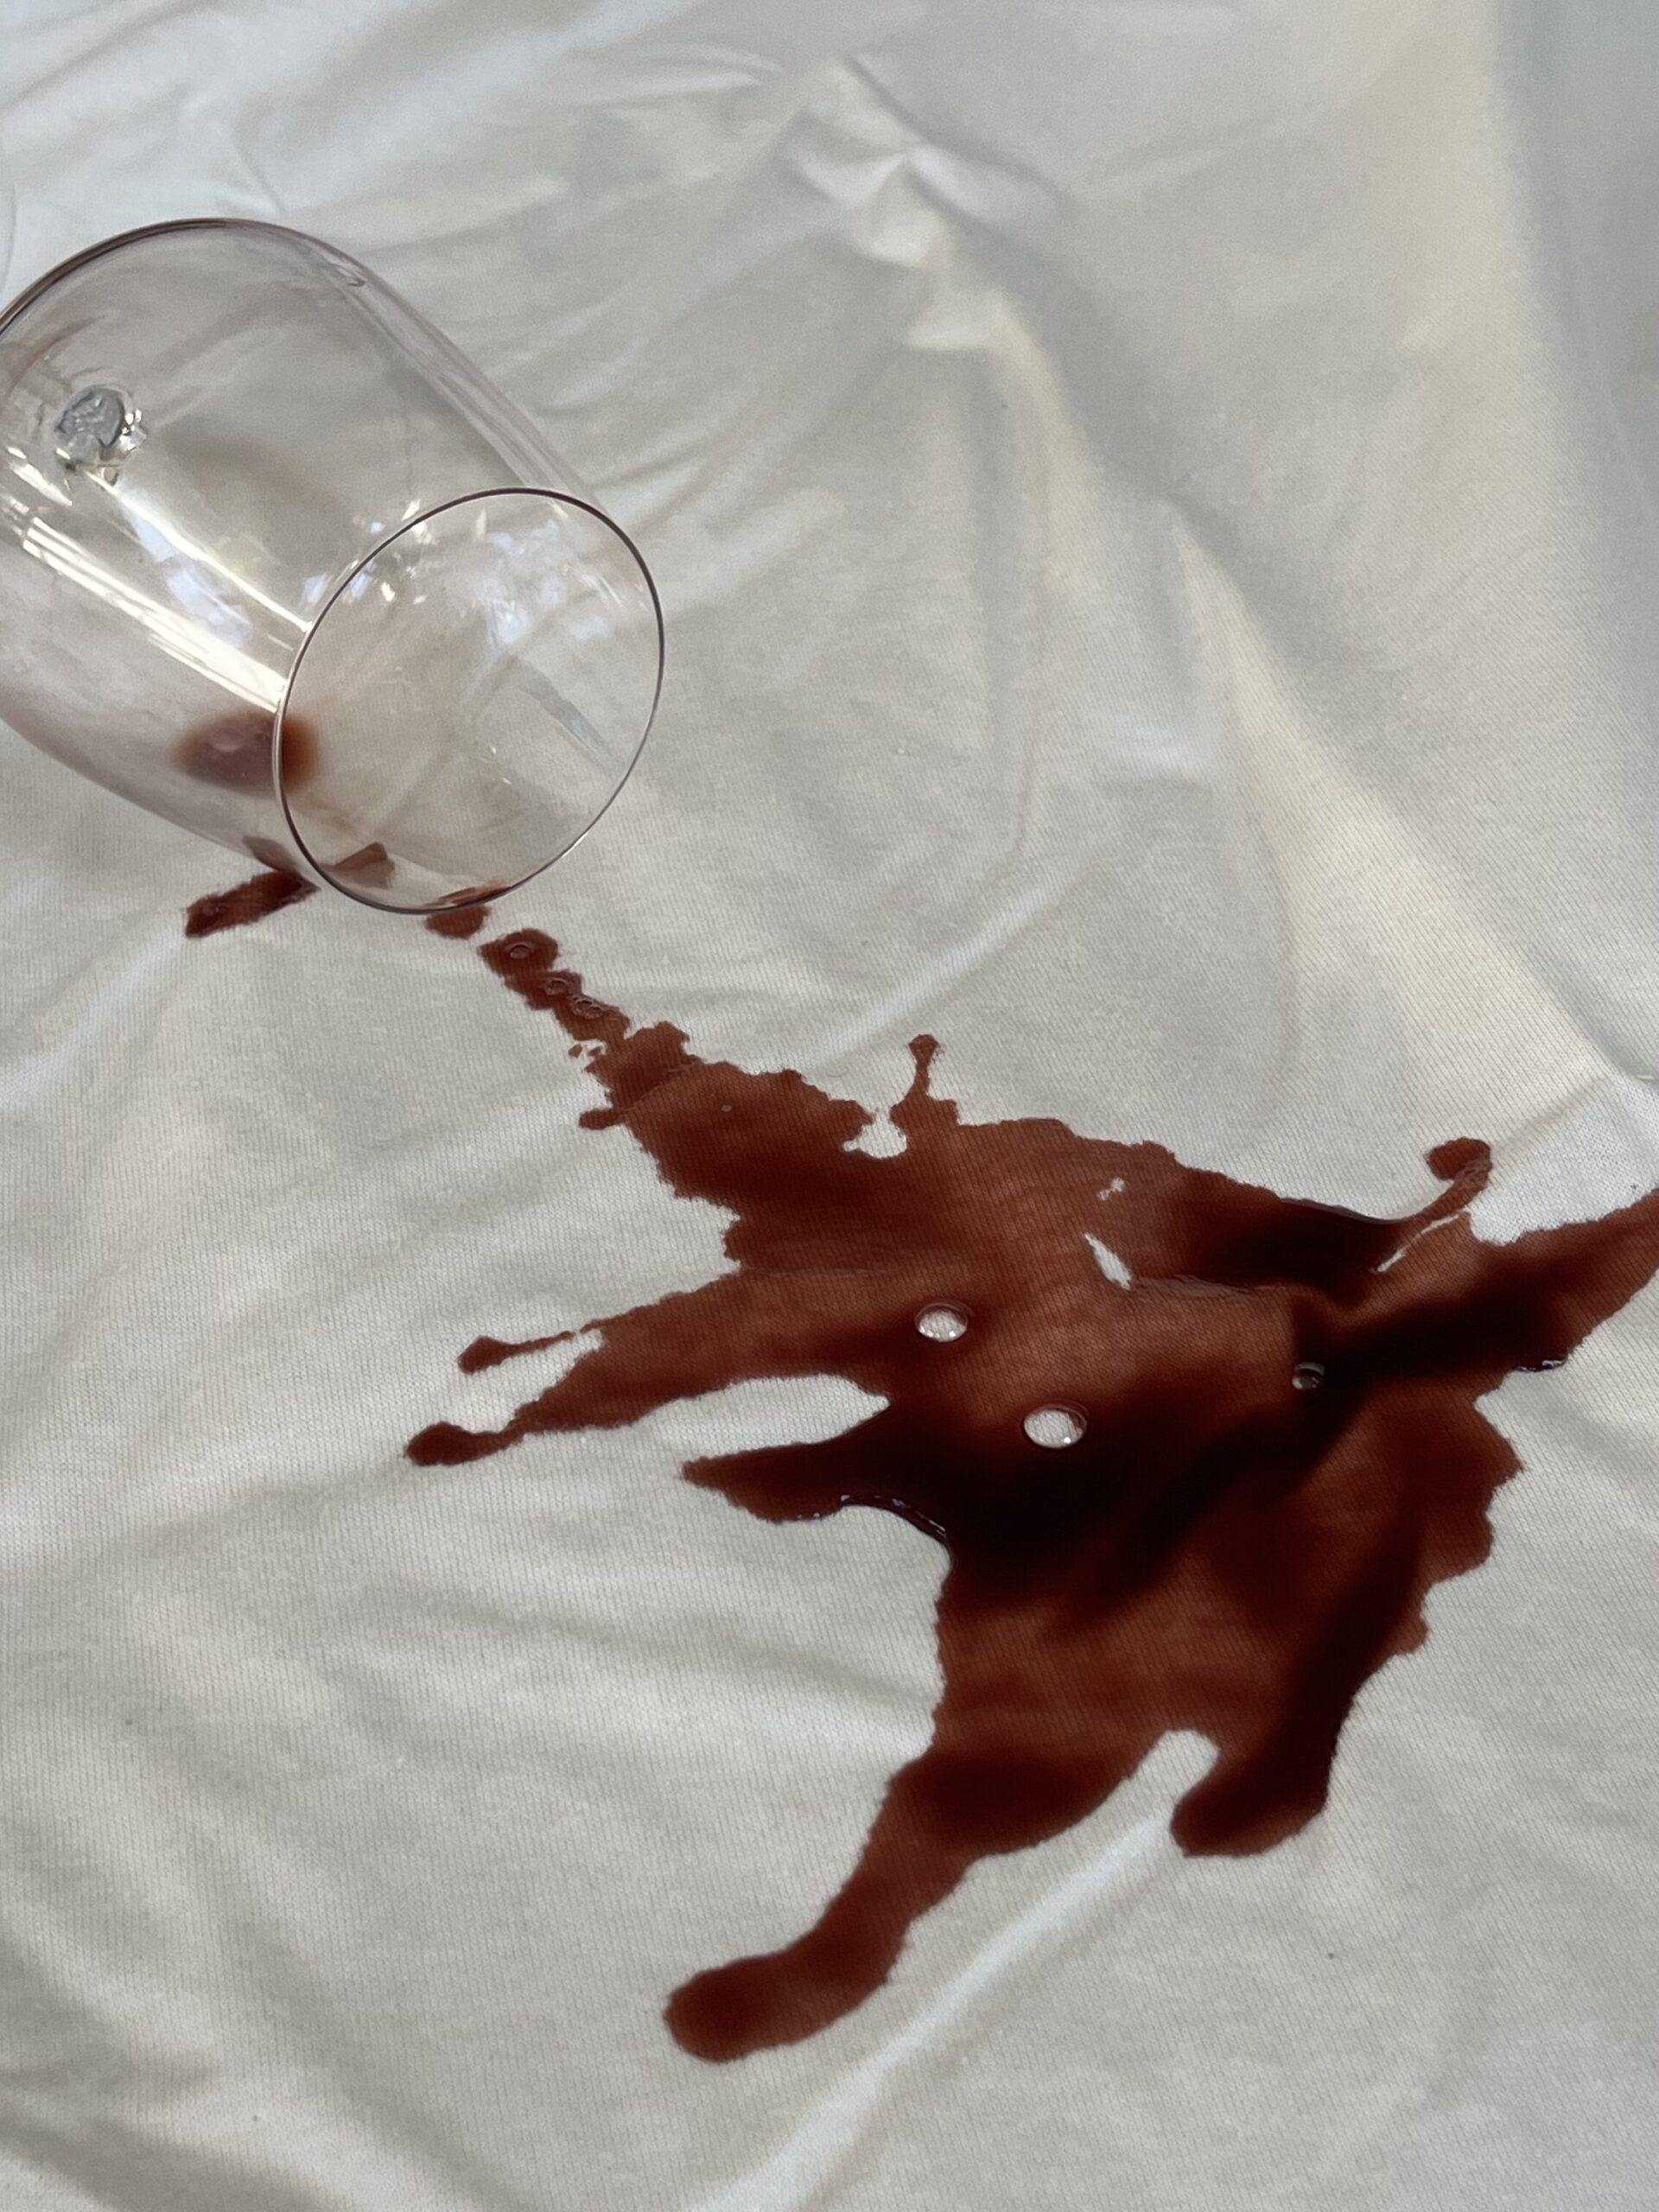 A wine glass lies on its side with spilled red wine leaking out onto a white mattress protector.